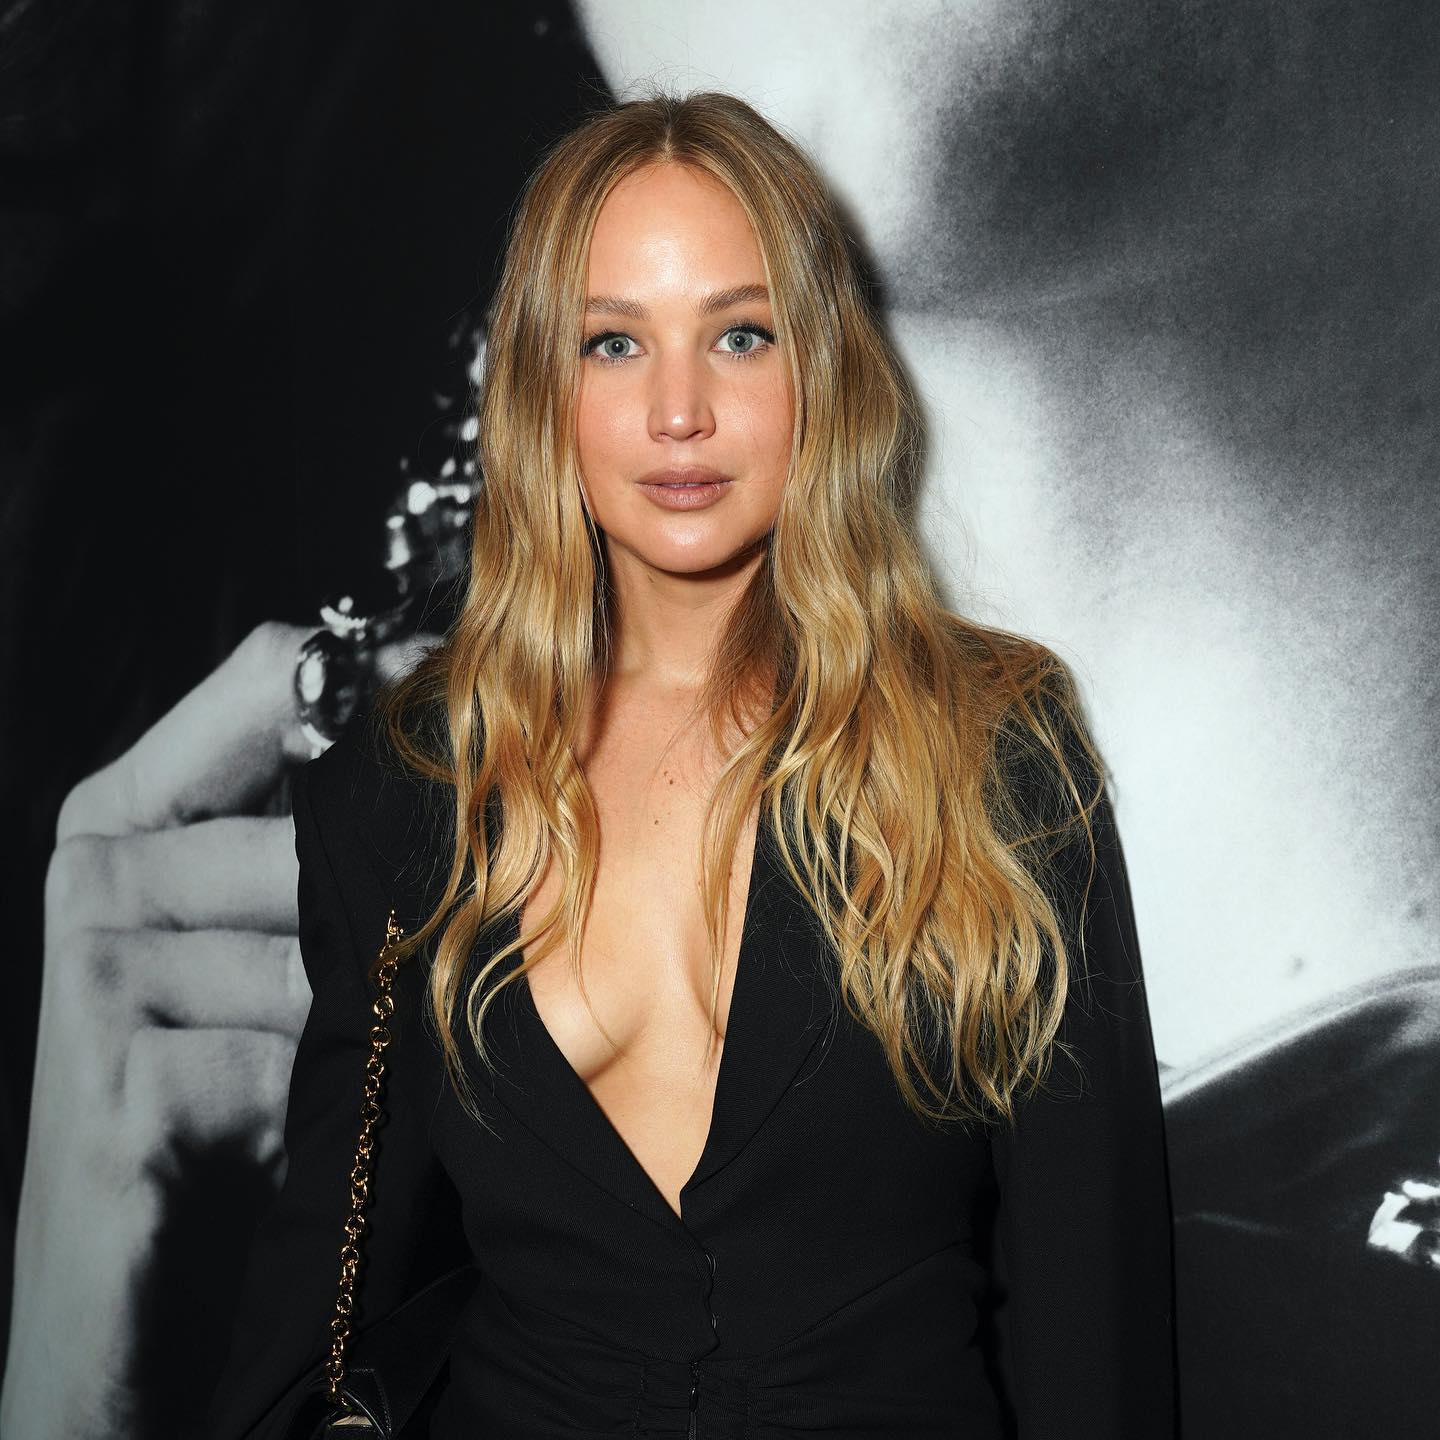 Jennifer Lawrence attends W Magazine’s Annual Best Performances Party in Los Angeles